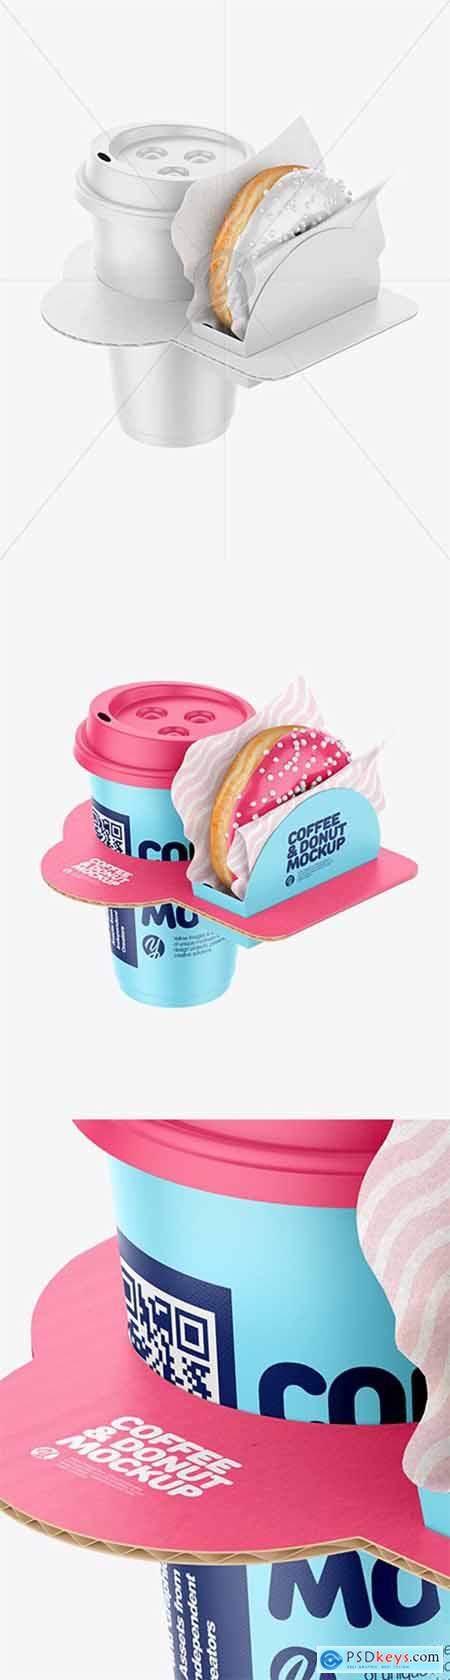 Coffee Cup with Donut in Holder Mockup 38867